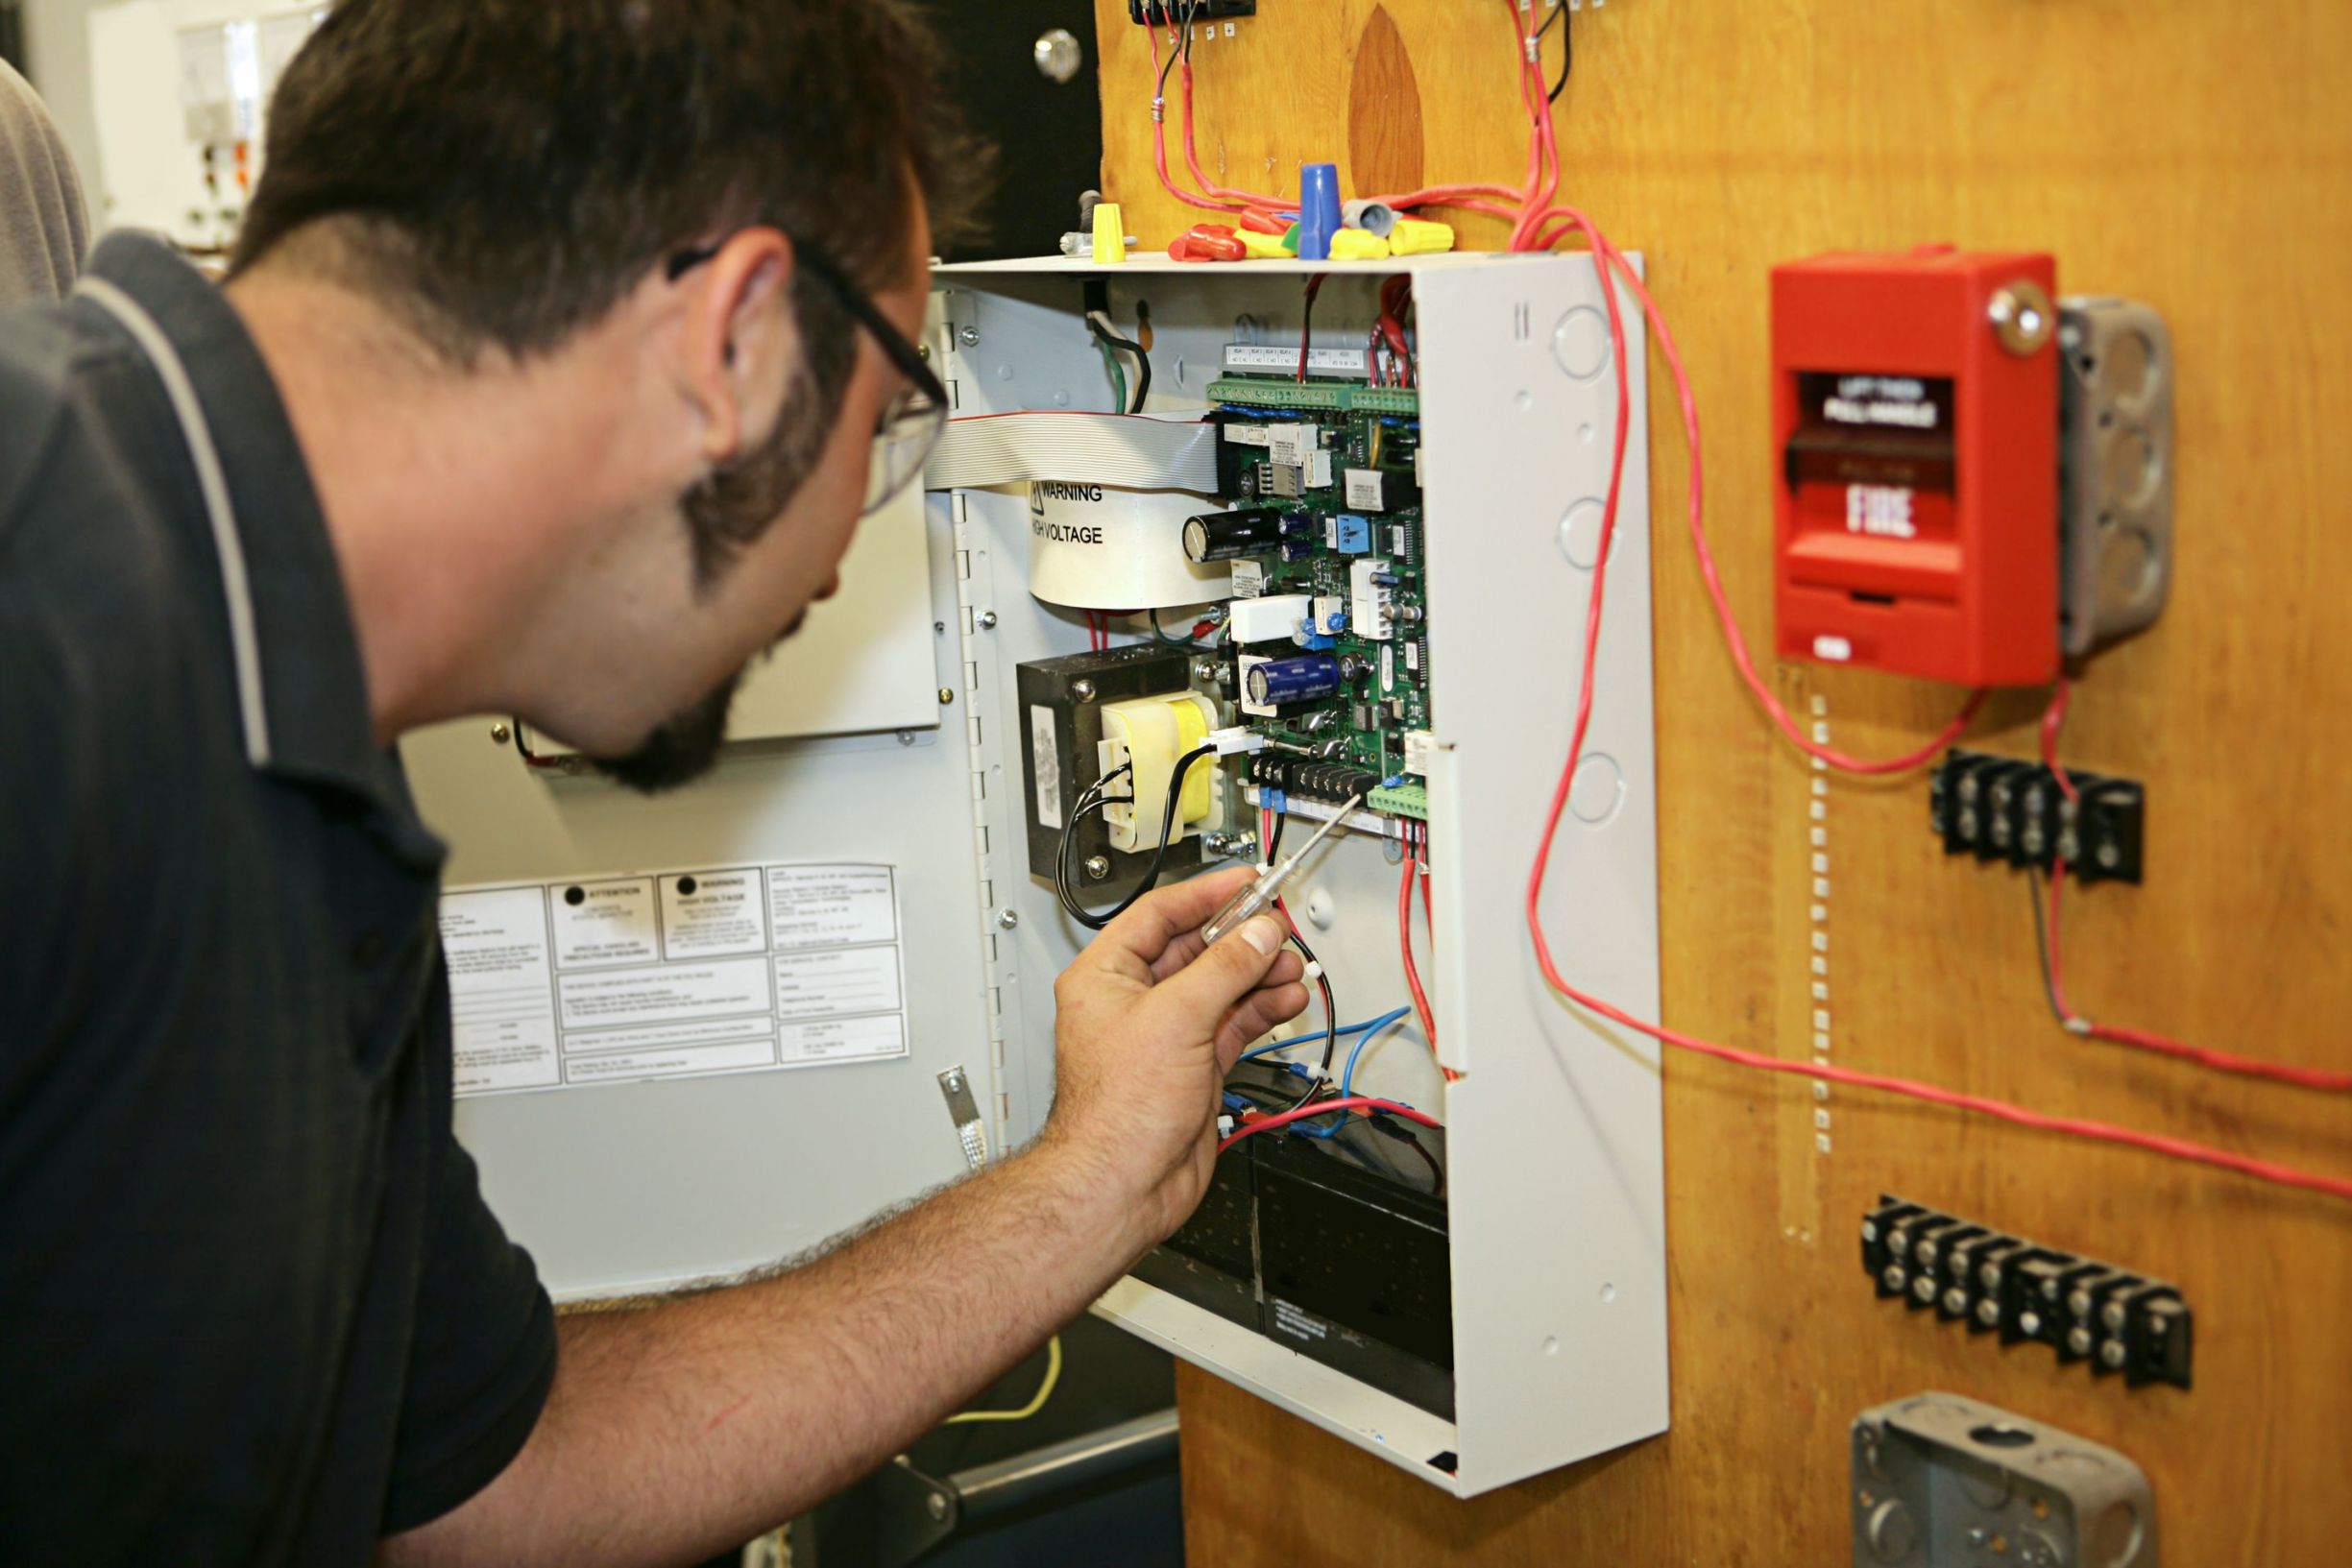 Quality Electrical Installation Services In Tucson AZ Can Help Avoid Electrical Problems And Disasters